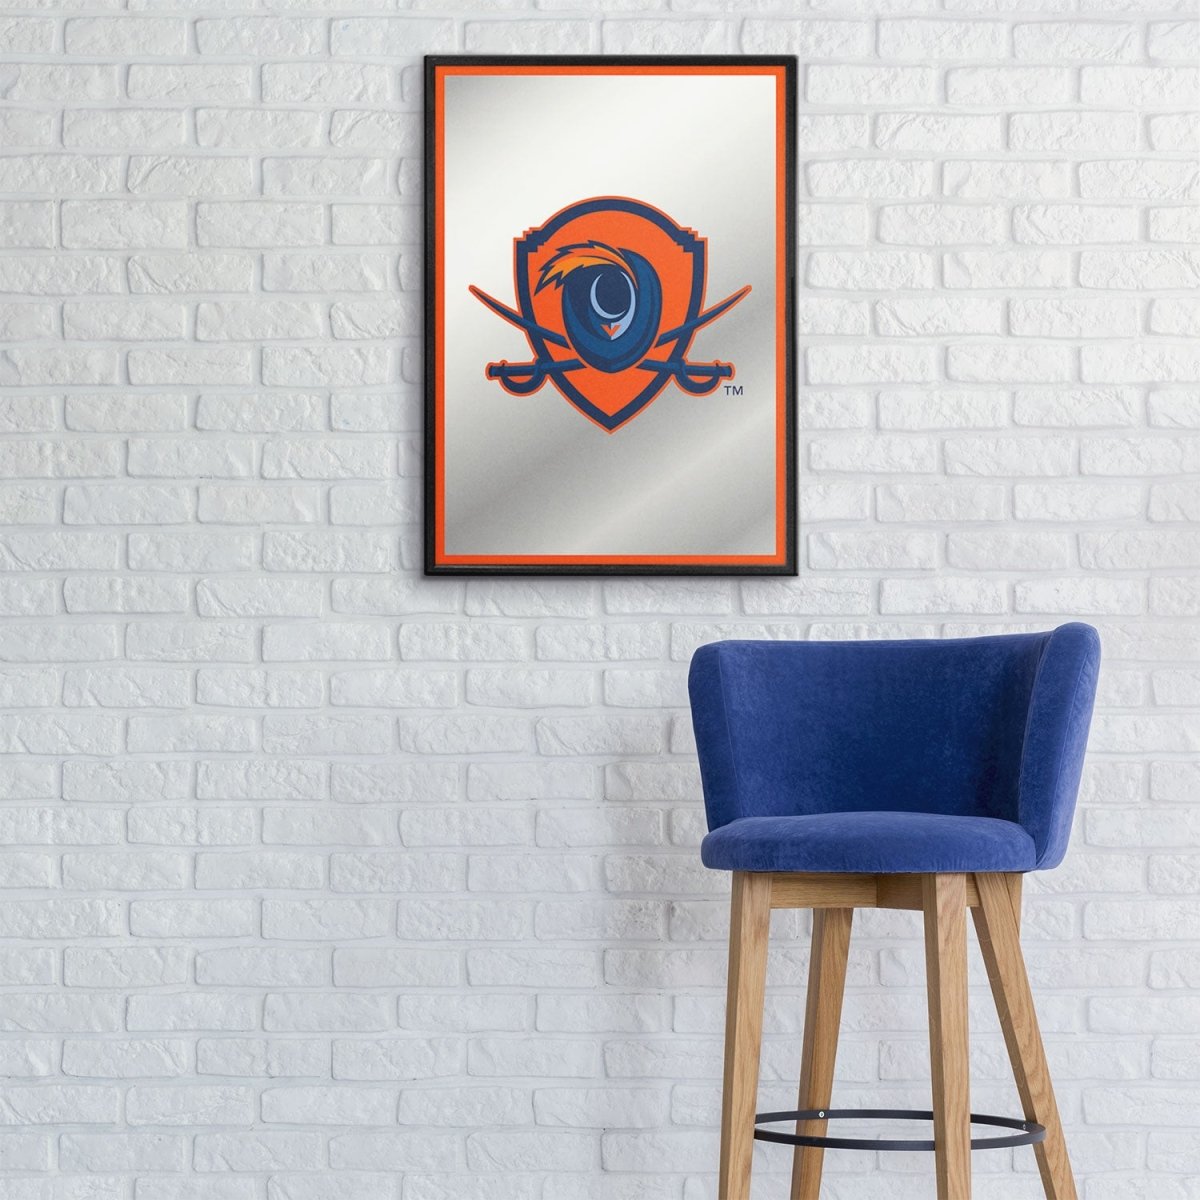 Virginia Cavaliers: Shield - Framed Mirrored Wall Sign - The Fan-Brand